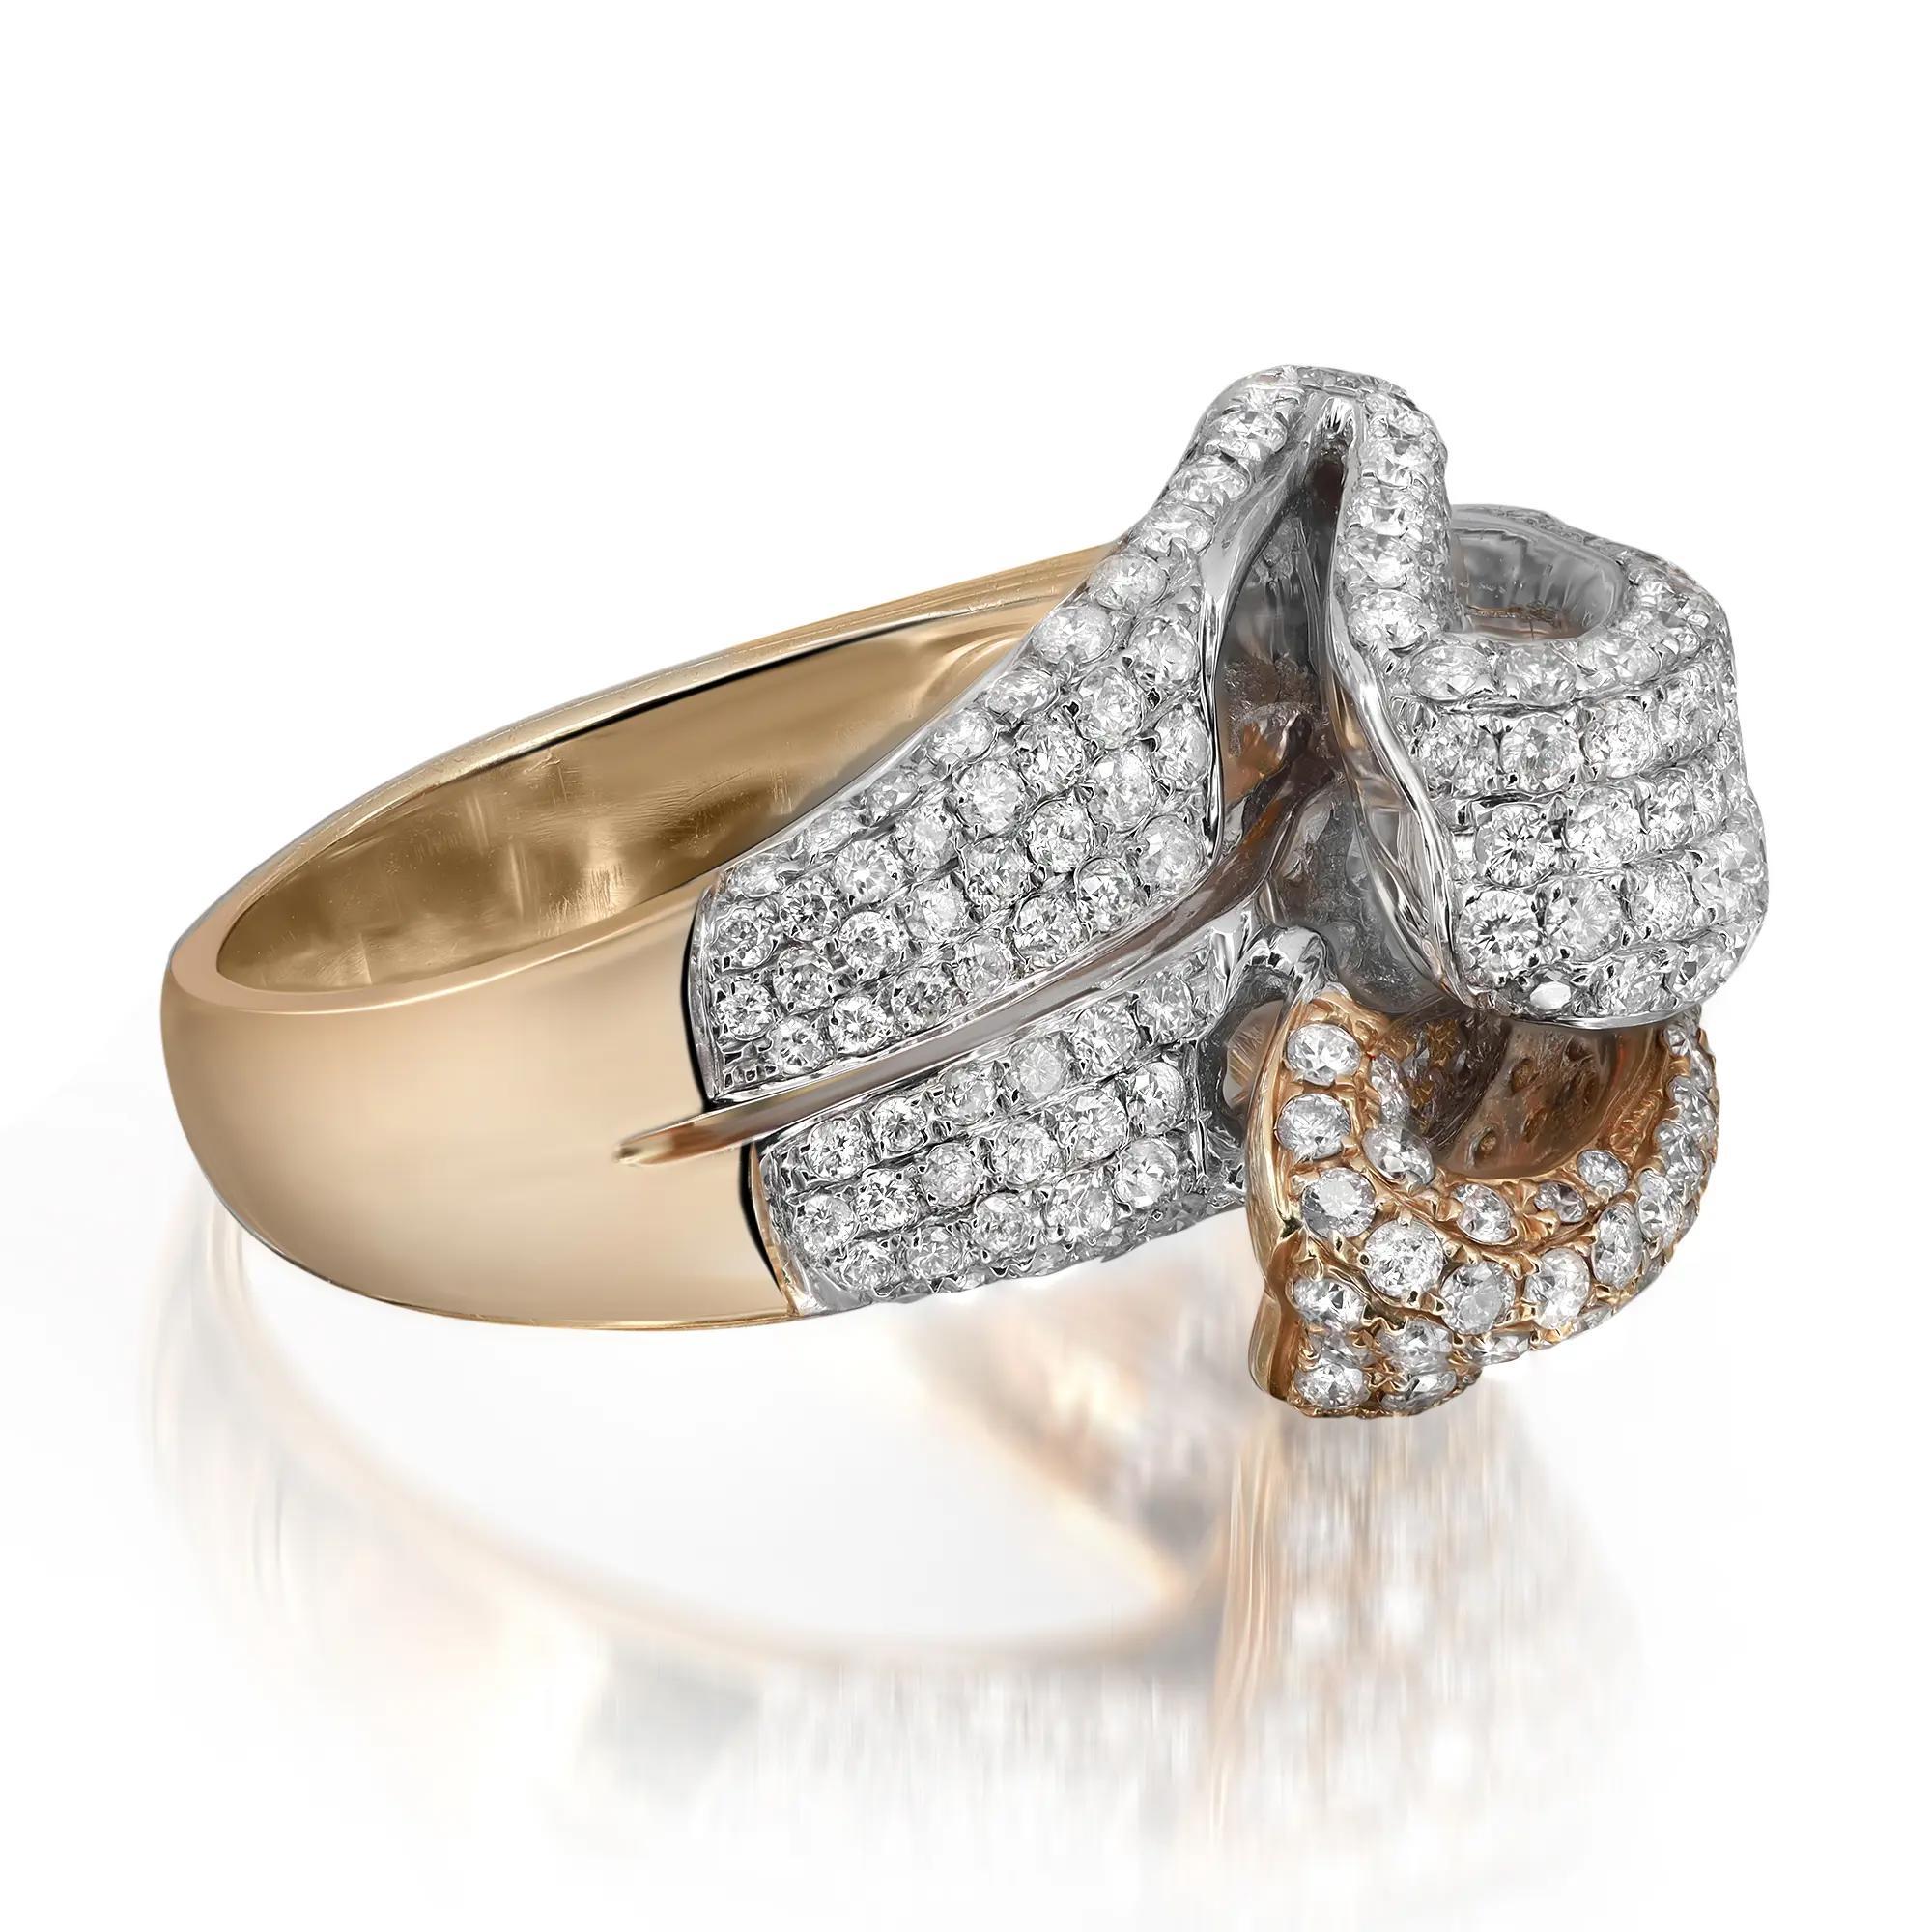 Dazzle away with this bold ladies cocktail ring. Crafted in 14k yellow and white gold. Showcasing pave set round brilliant cut diamonds weighing 2.12 carats. Diamond quality: I color and SI1 clarity. Ring size: 7.75. Total weight: 11.13 grams. This